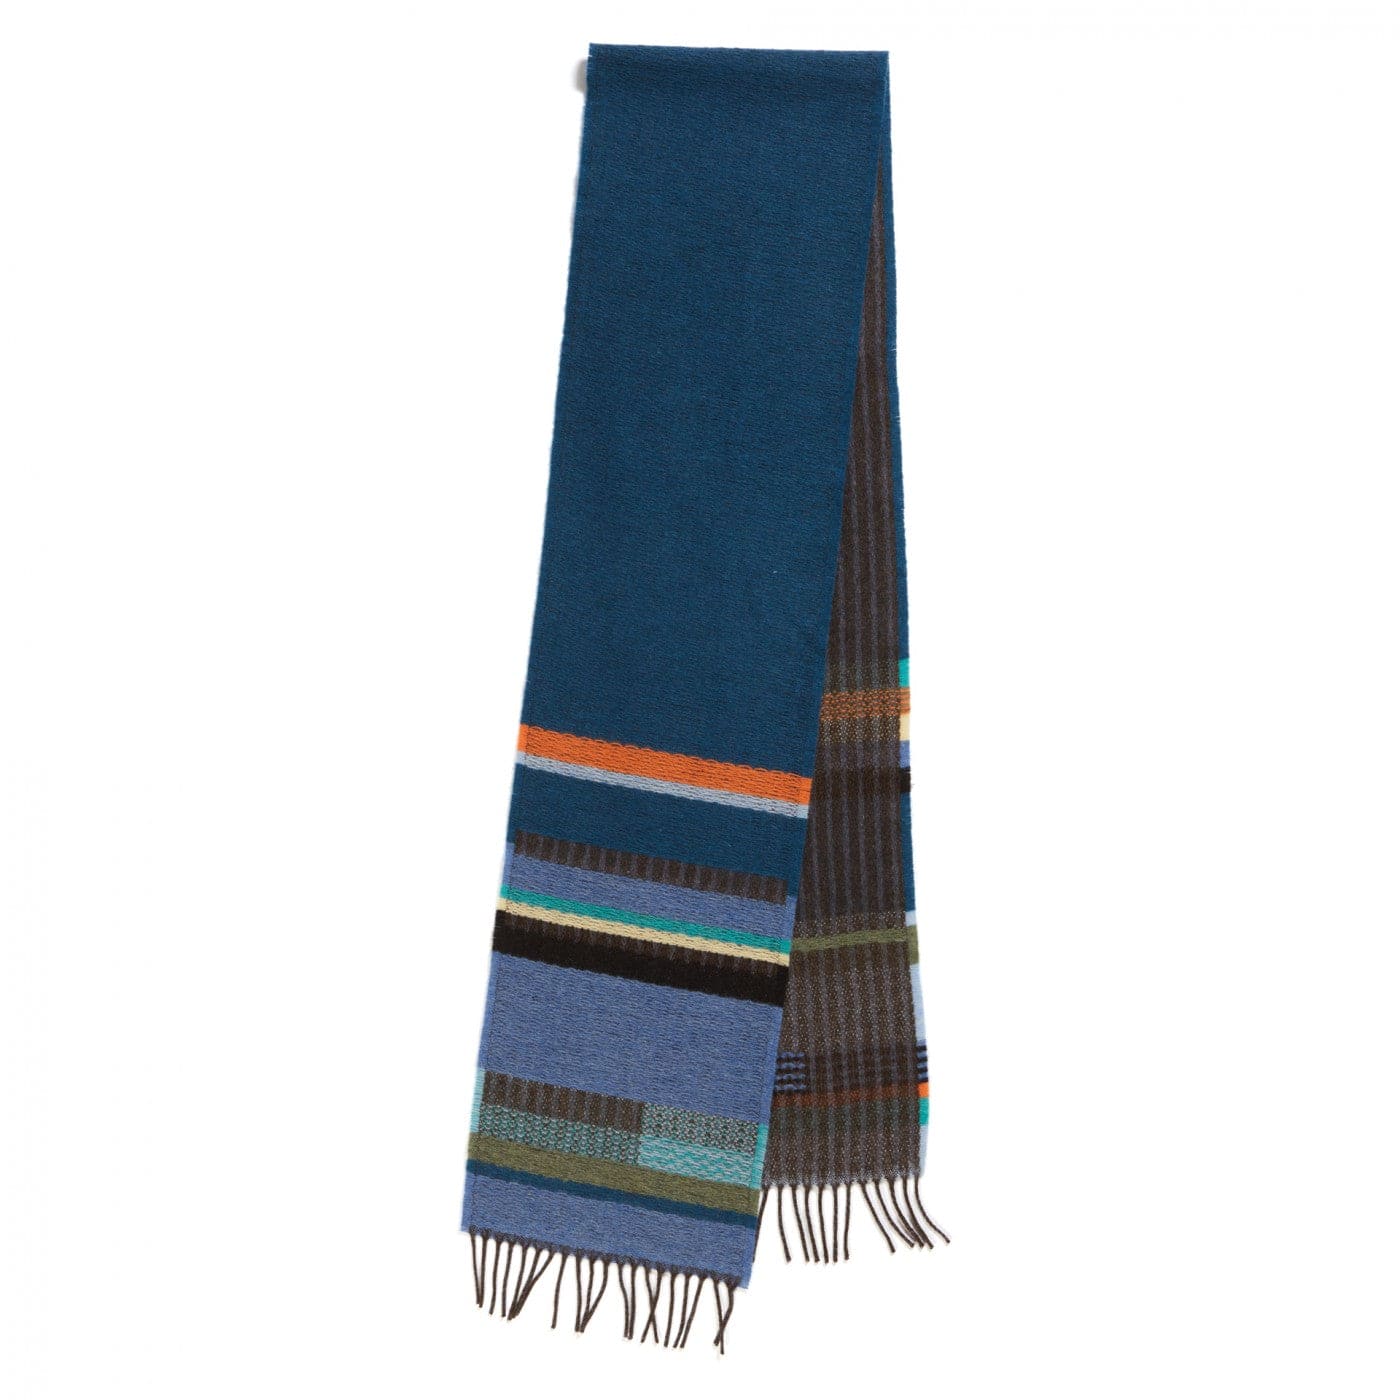 WALLACE+SEWELL - SCARF - DARLAND - BLUE